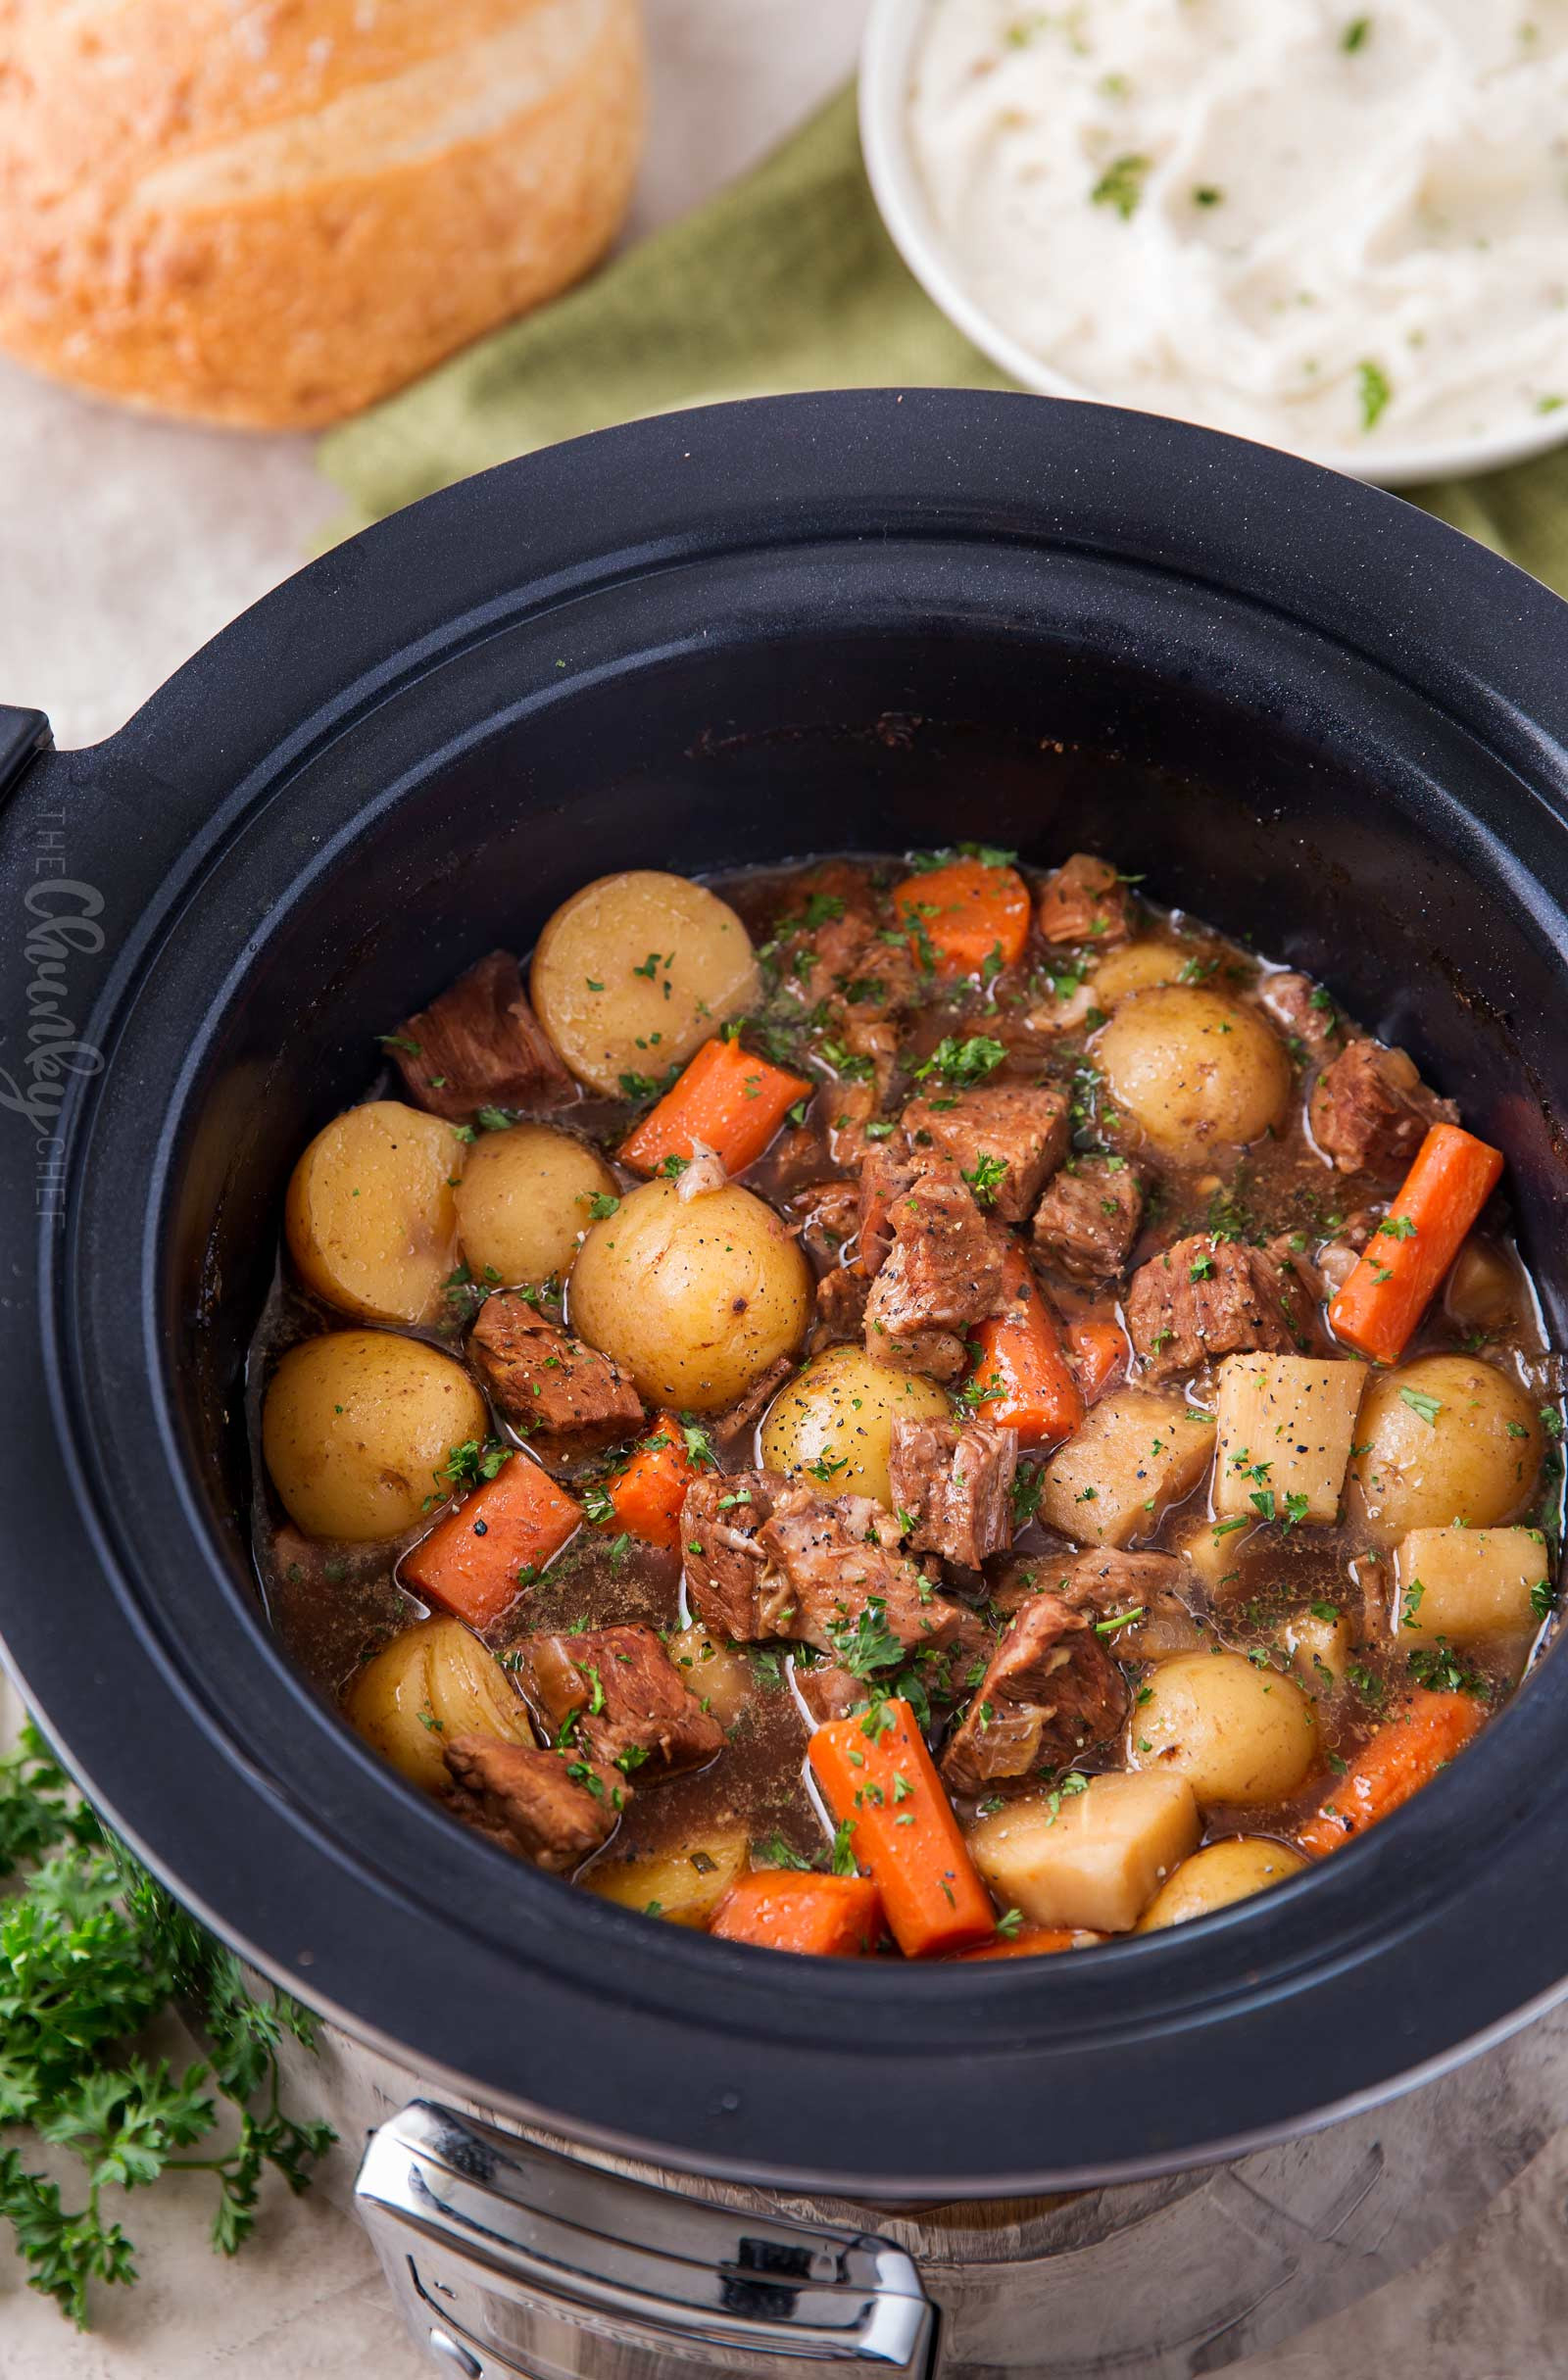 Slow Cooker Lamb Stew Recipes
 Beer and Horseradish Slow Cooker Beef Stew The Chunky Chef